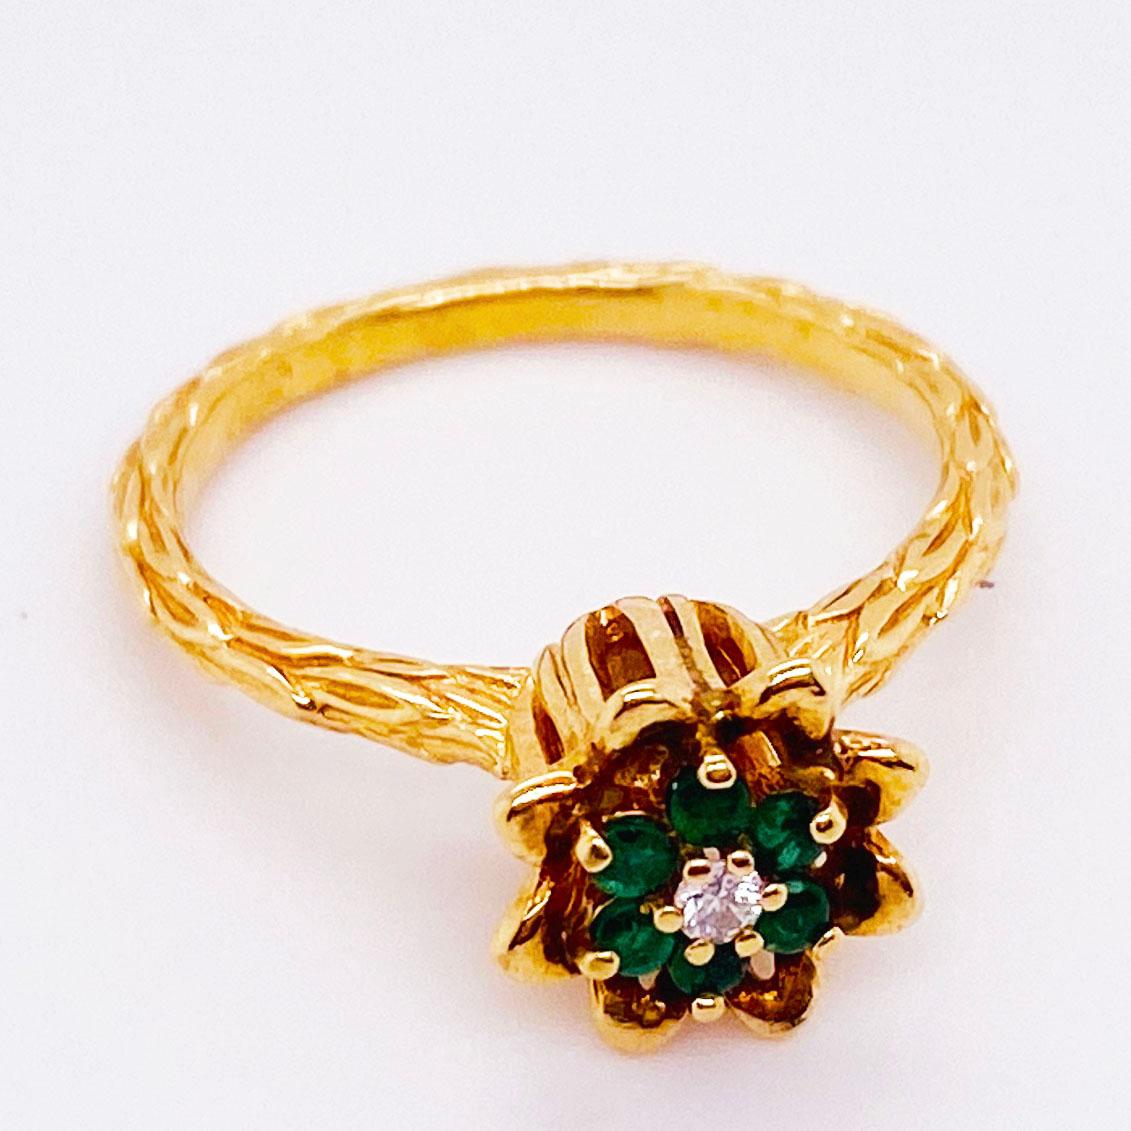 The adorable emerald and diamond tulip ring is a classic flower design that has been worn for generations. This dainty fine jewelry piece is made with genuine round emerald gemstones and a natural round brilliant diamond. The tulip design has deep